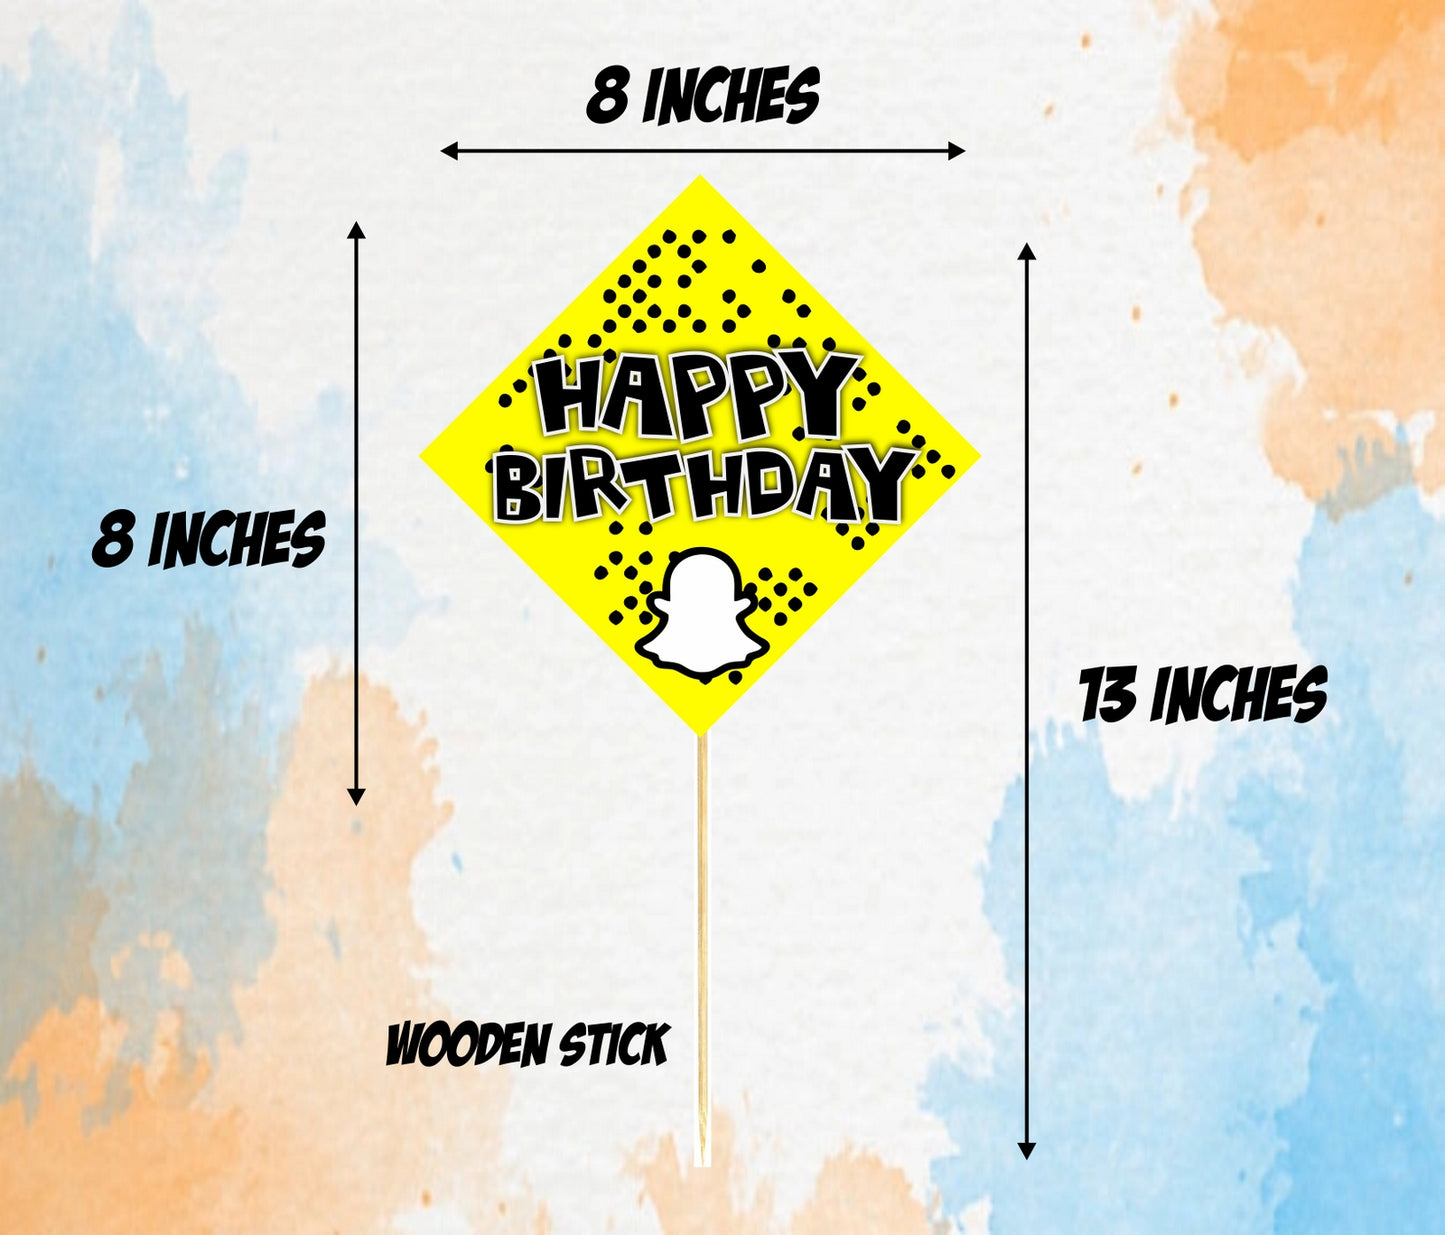 Snapchat Theme Birthday Photo Booth Party Props Theme Birthday Party Decoration, Birthday Photo Booth Party Item for Adults and Kids